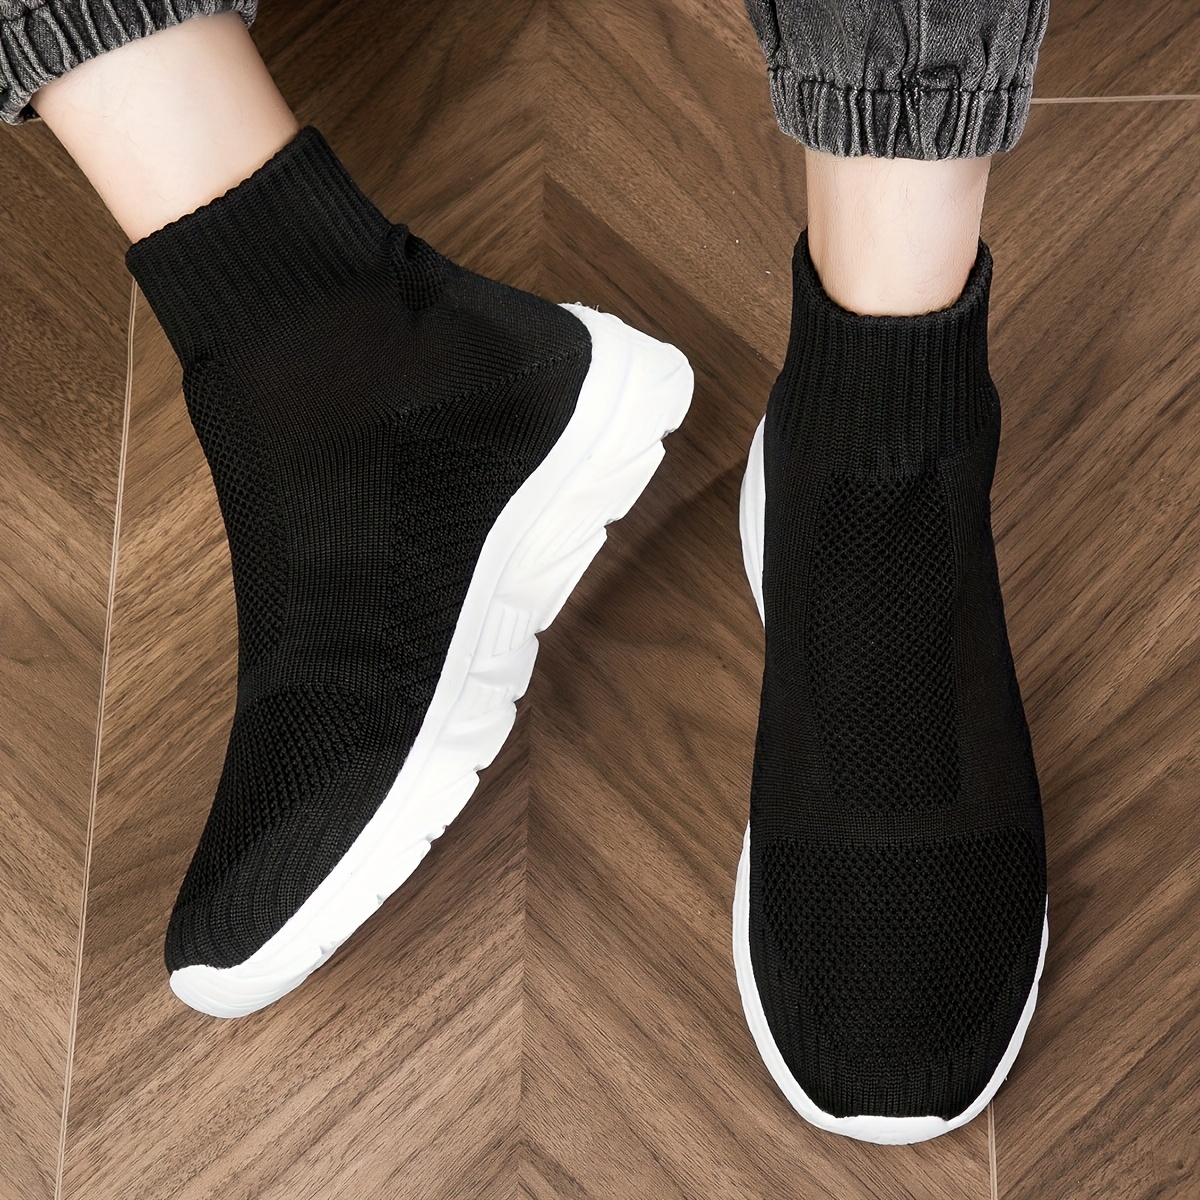 

Men's Stylish Slip On Sock Shoes: Athletic High Top Breathable Woven Knit Lightweight Sneakers For Running!